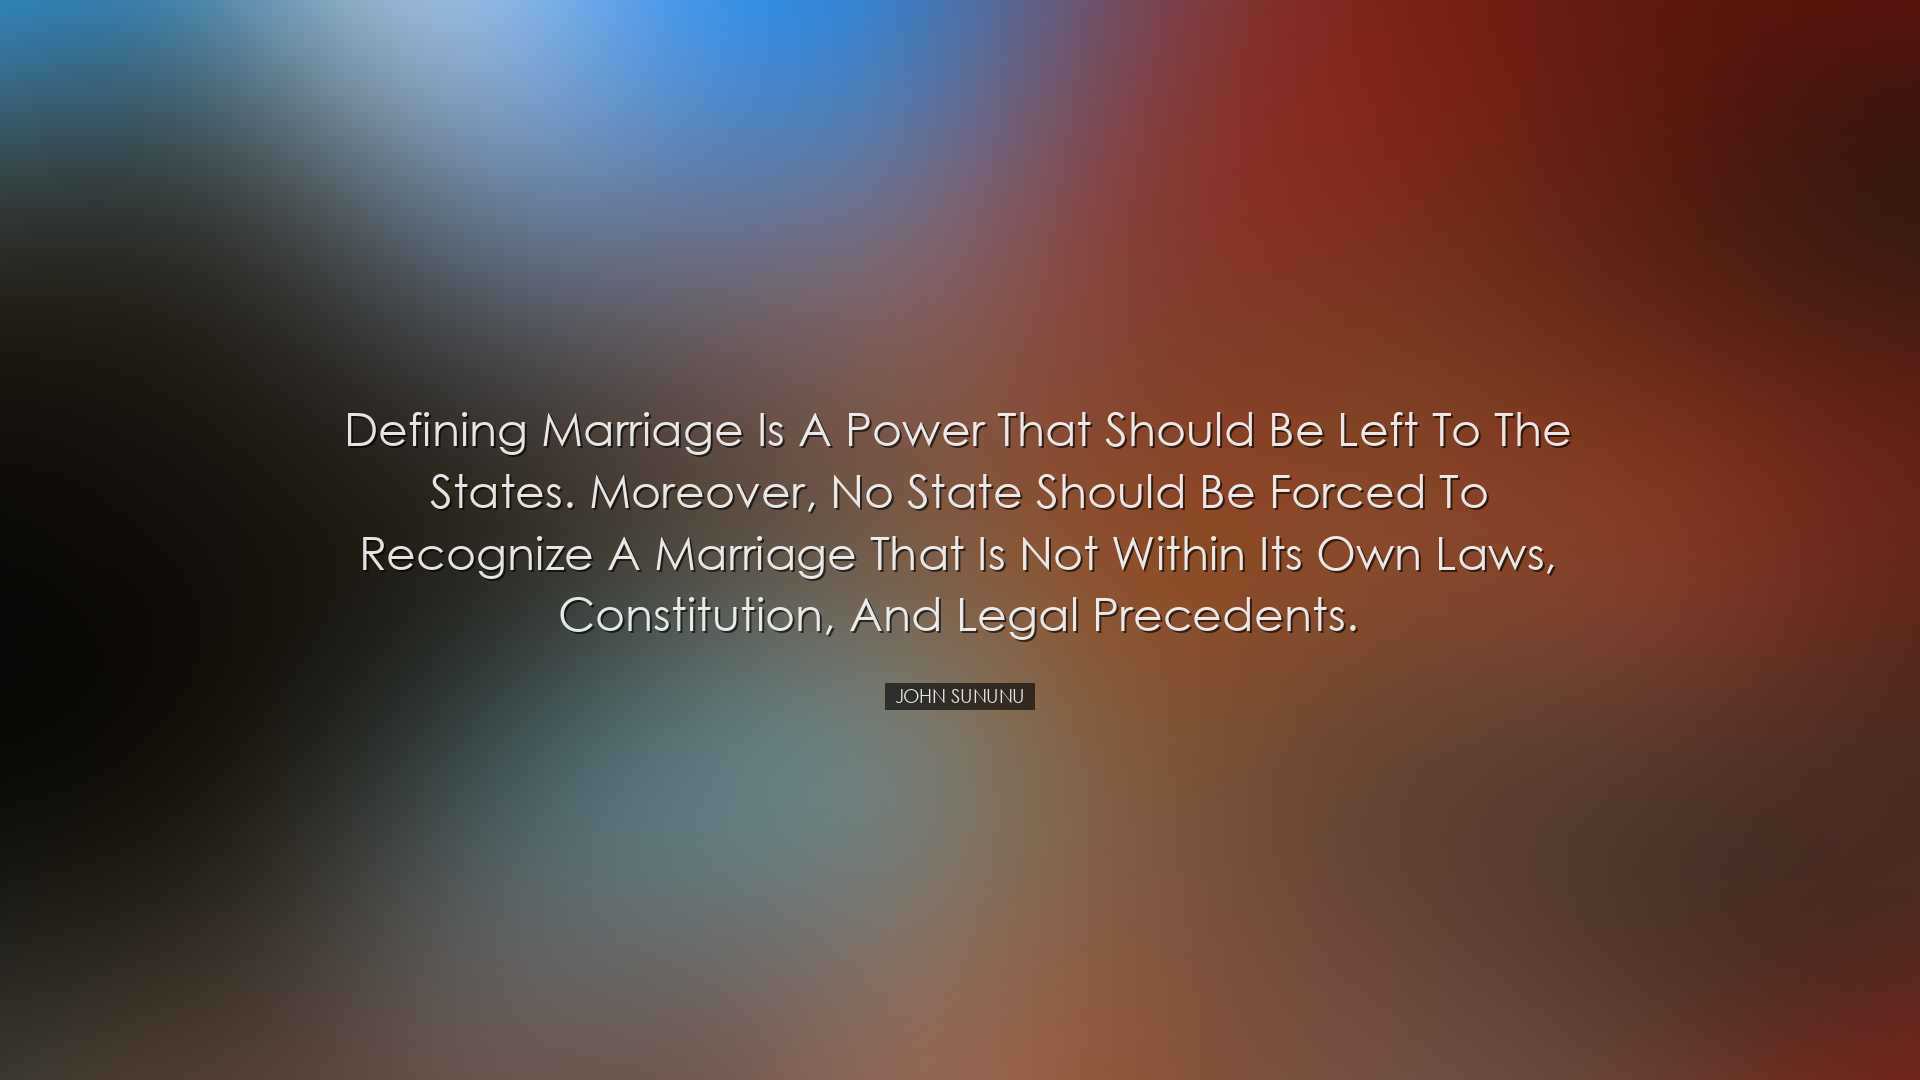 Defining marriage is a power that should be left to the states. Mo